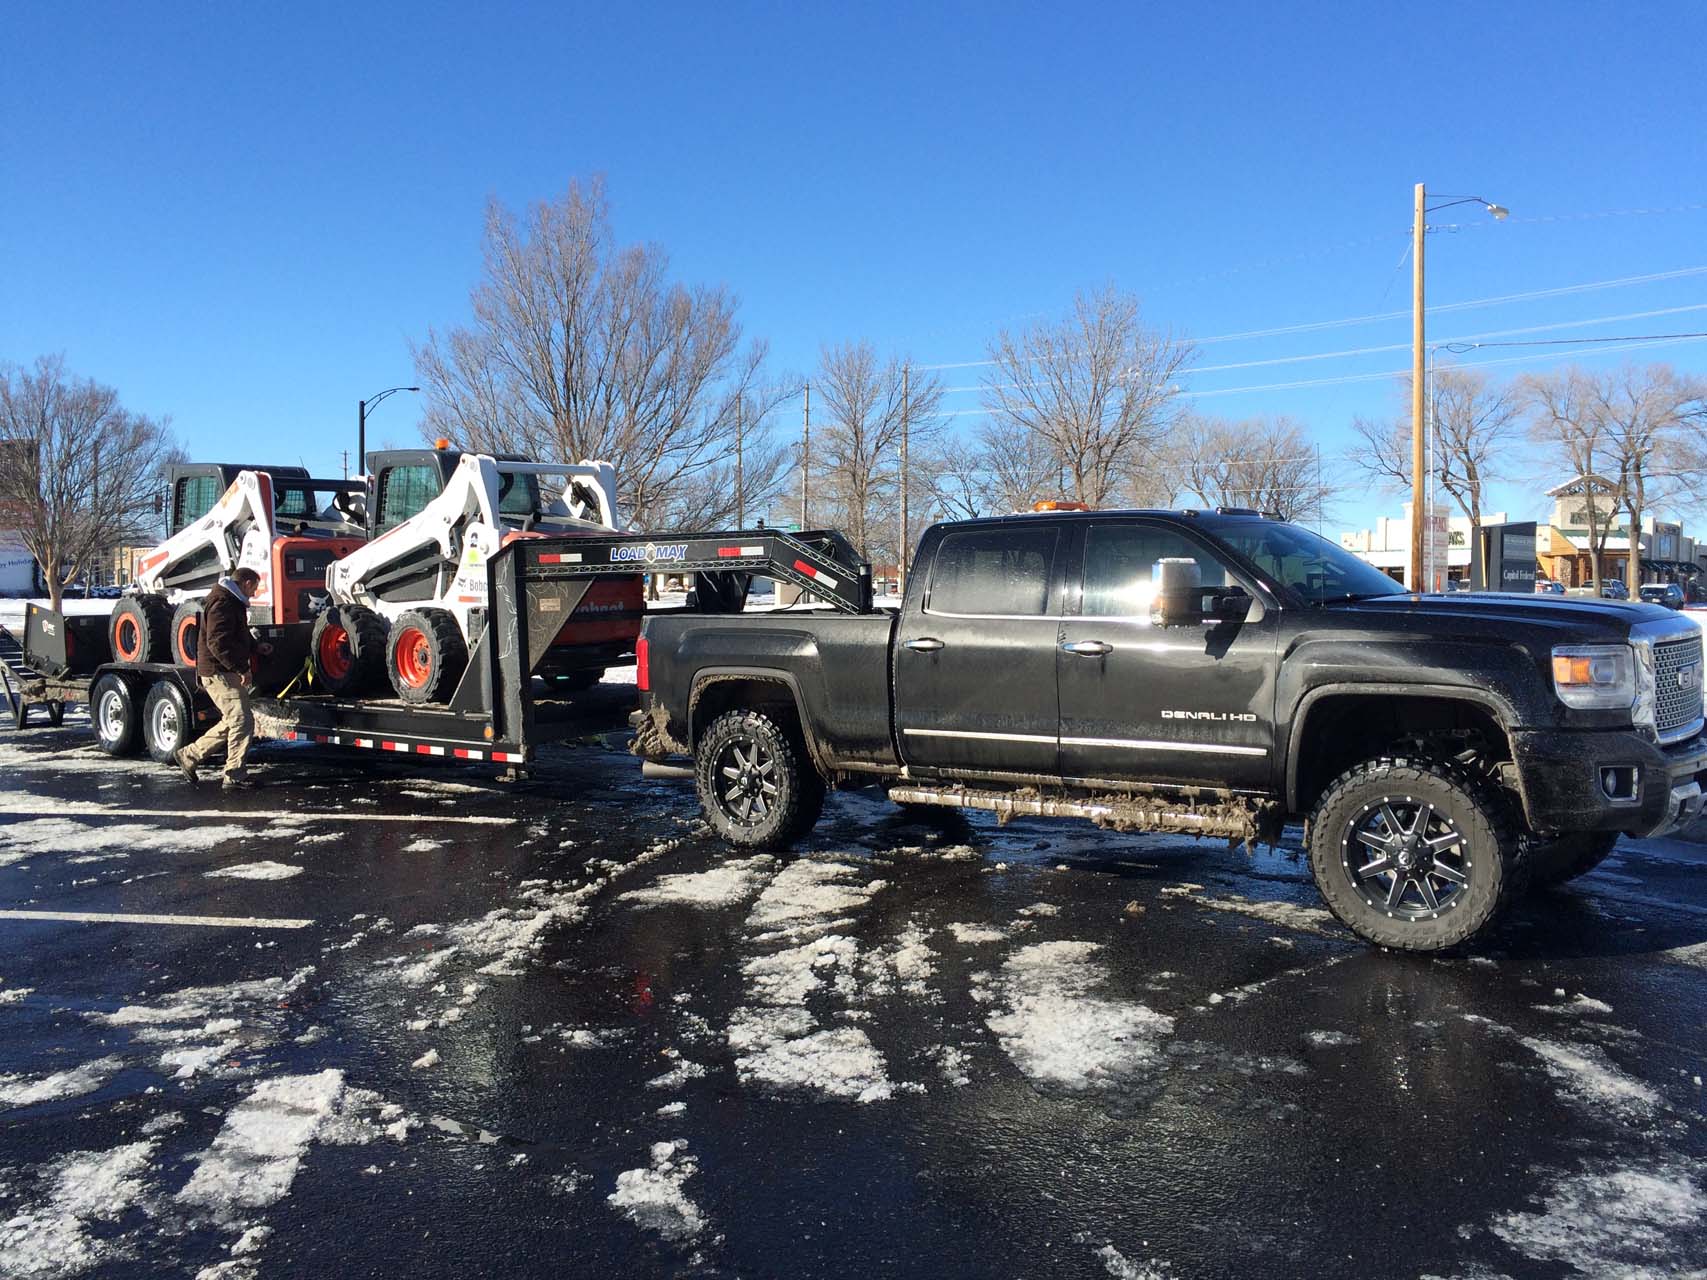 a black truck pulls a trailer of snow removal vehicles